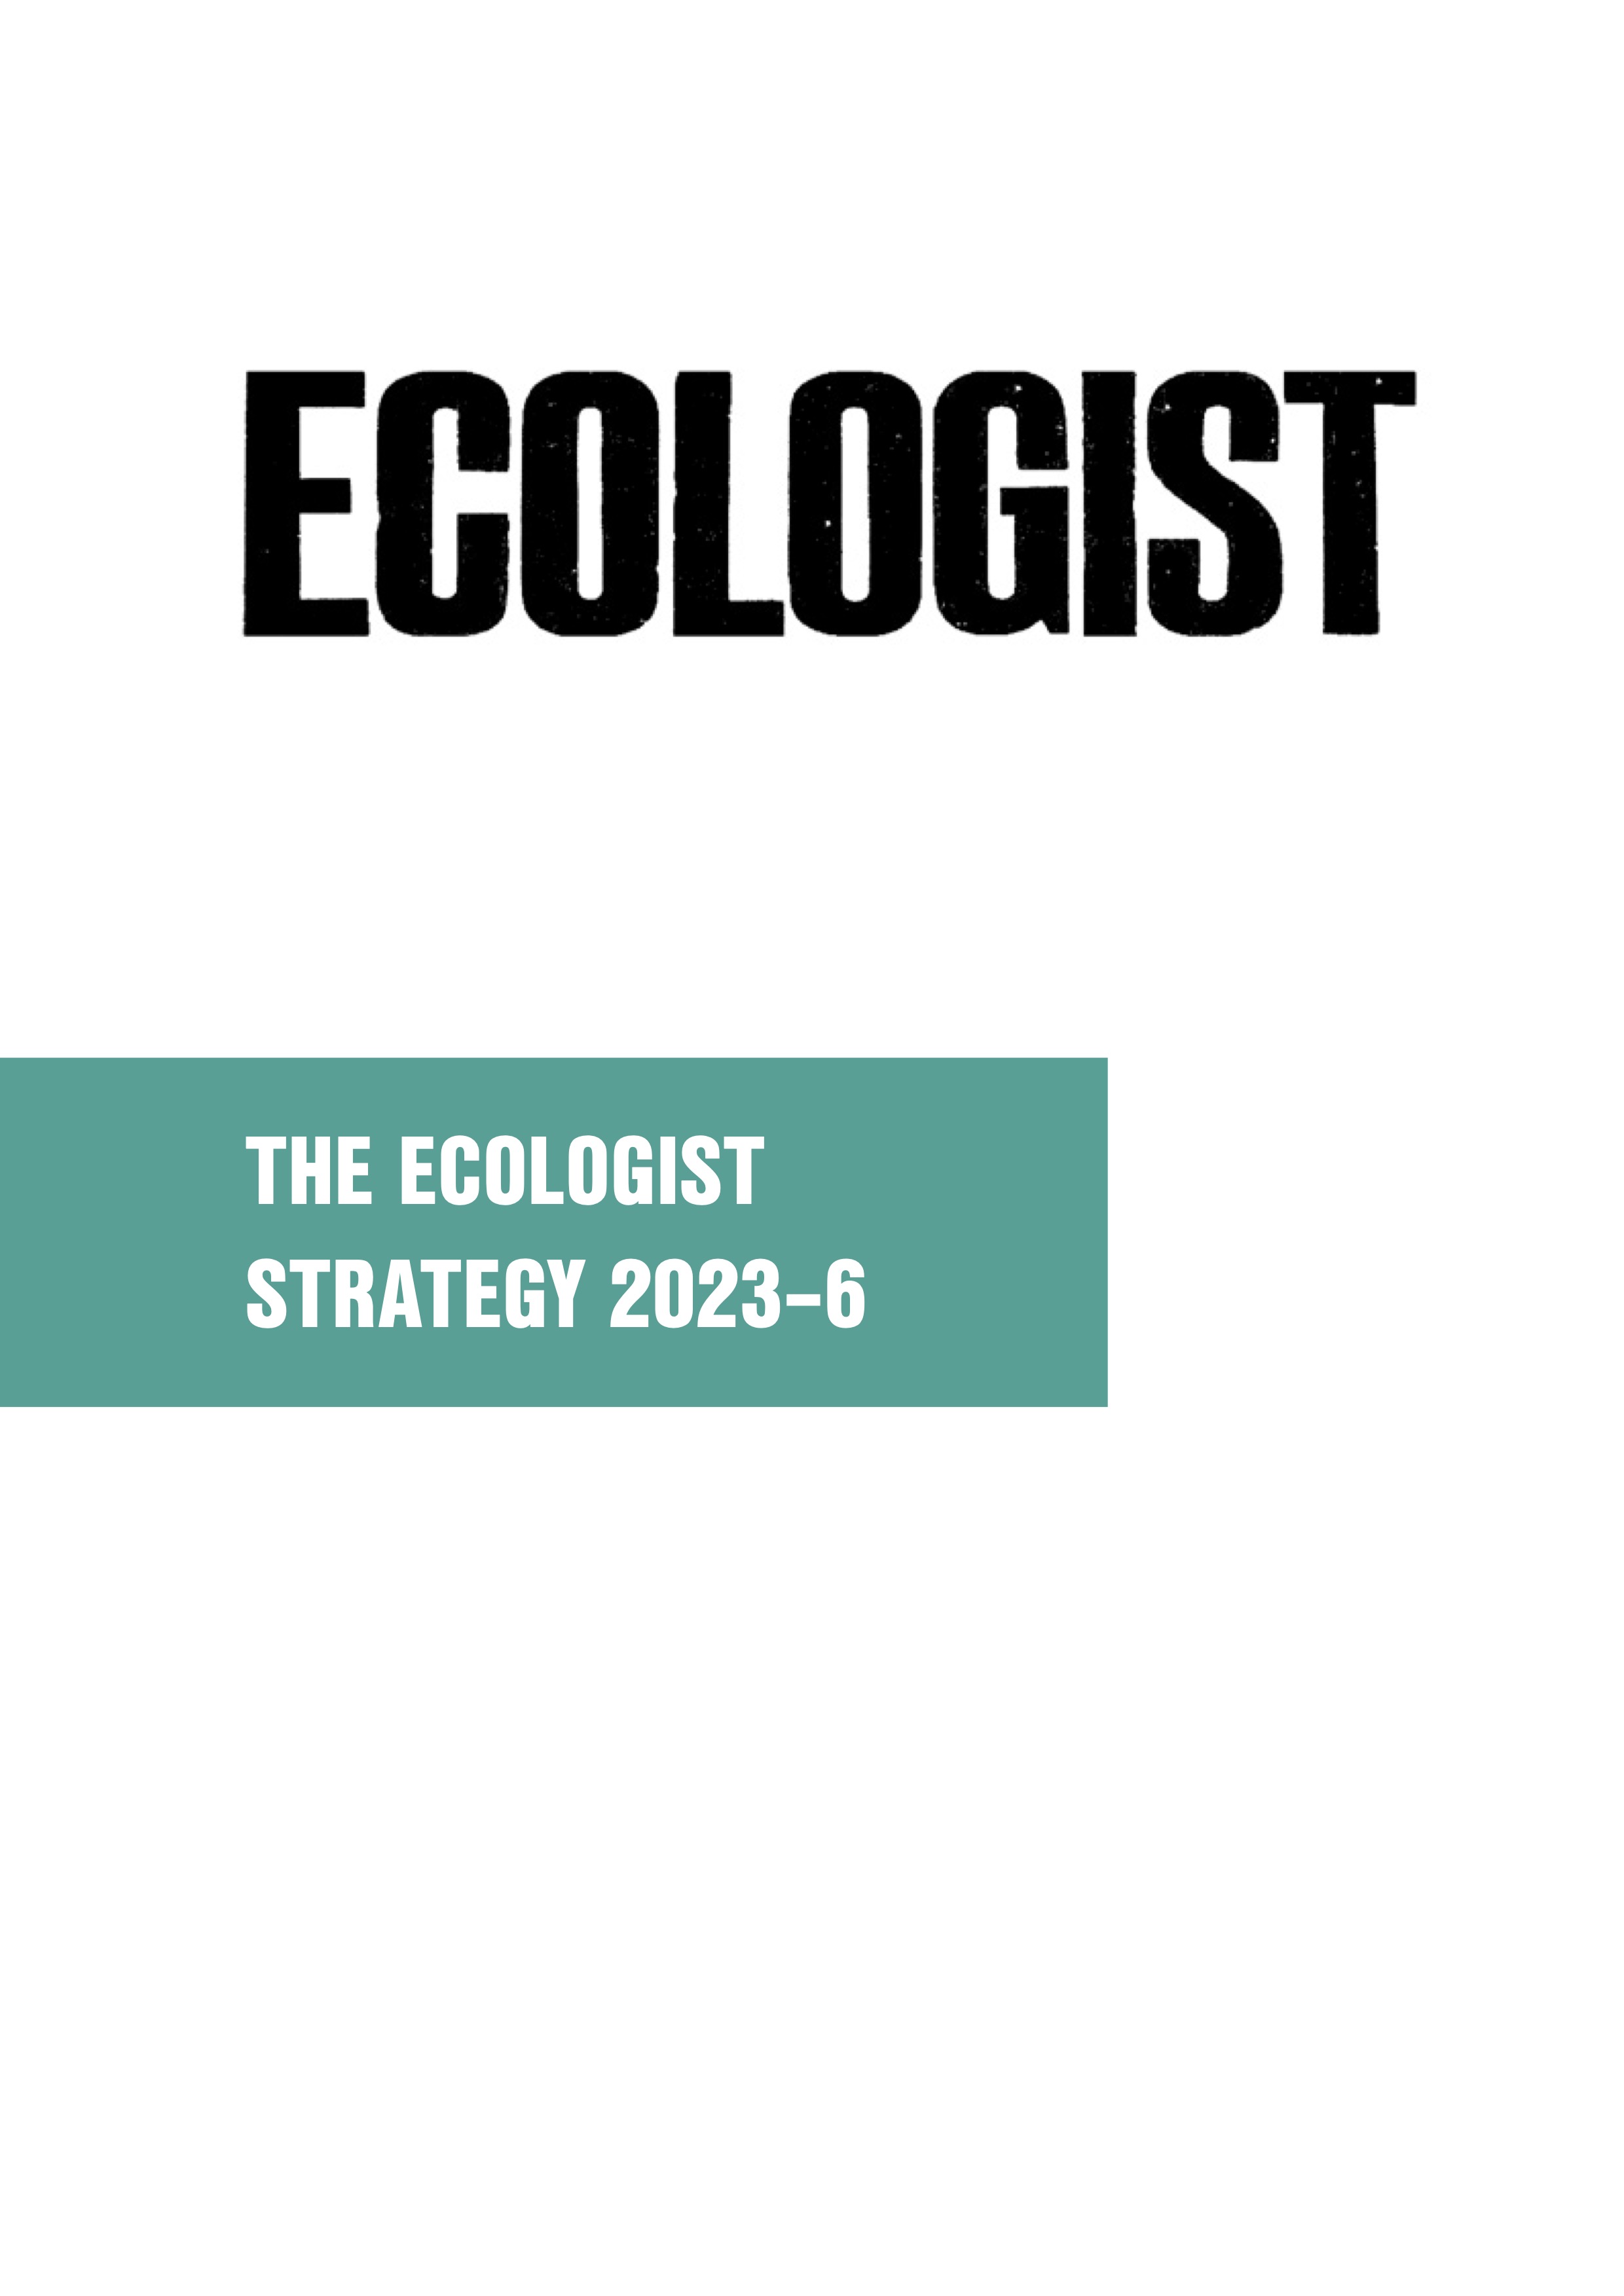 Ecologist Strategy 2023-6